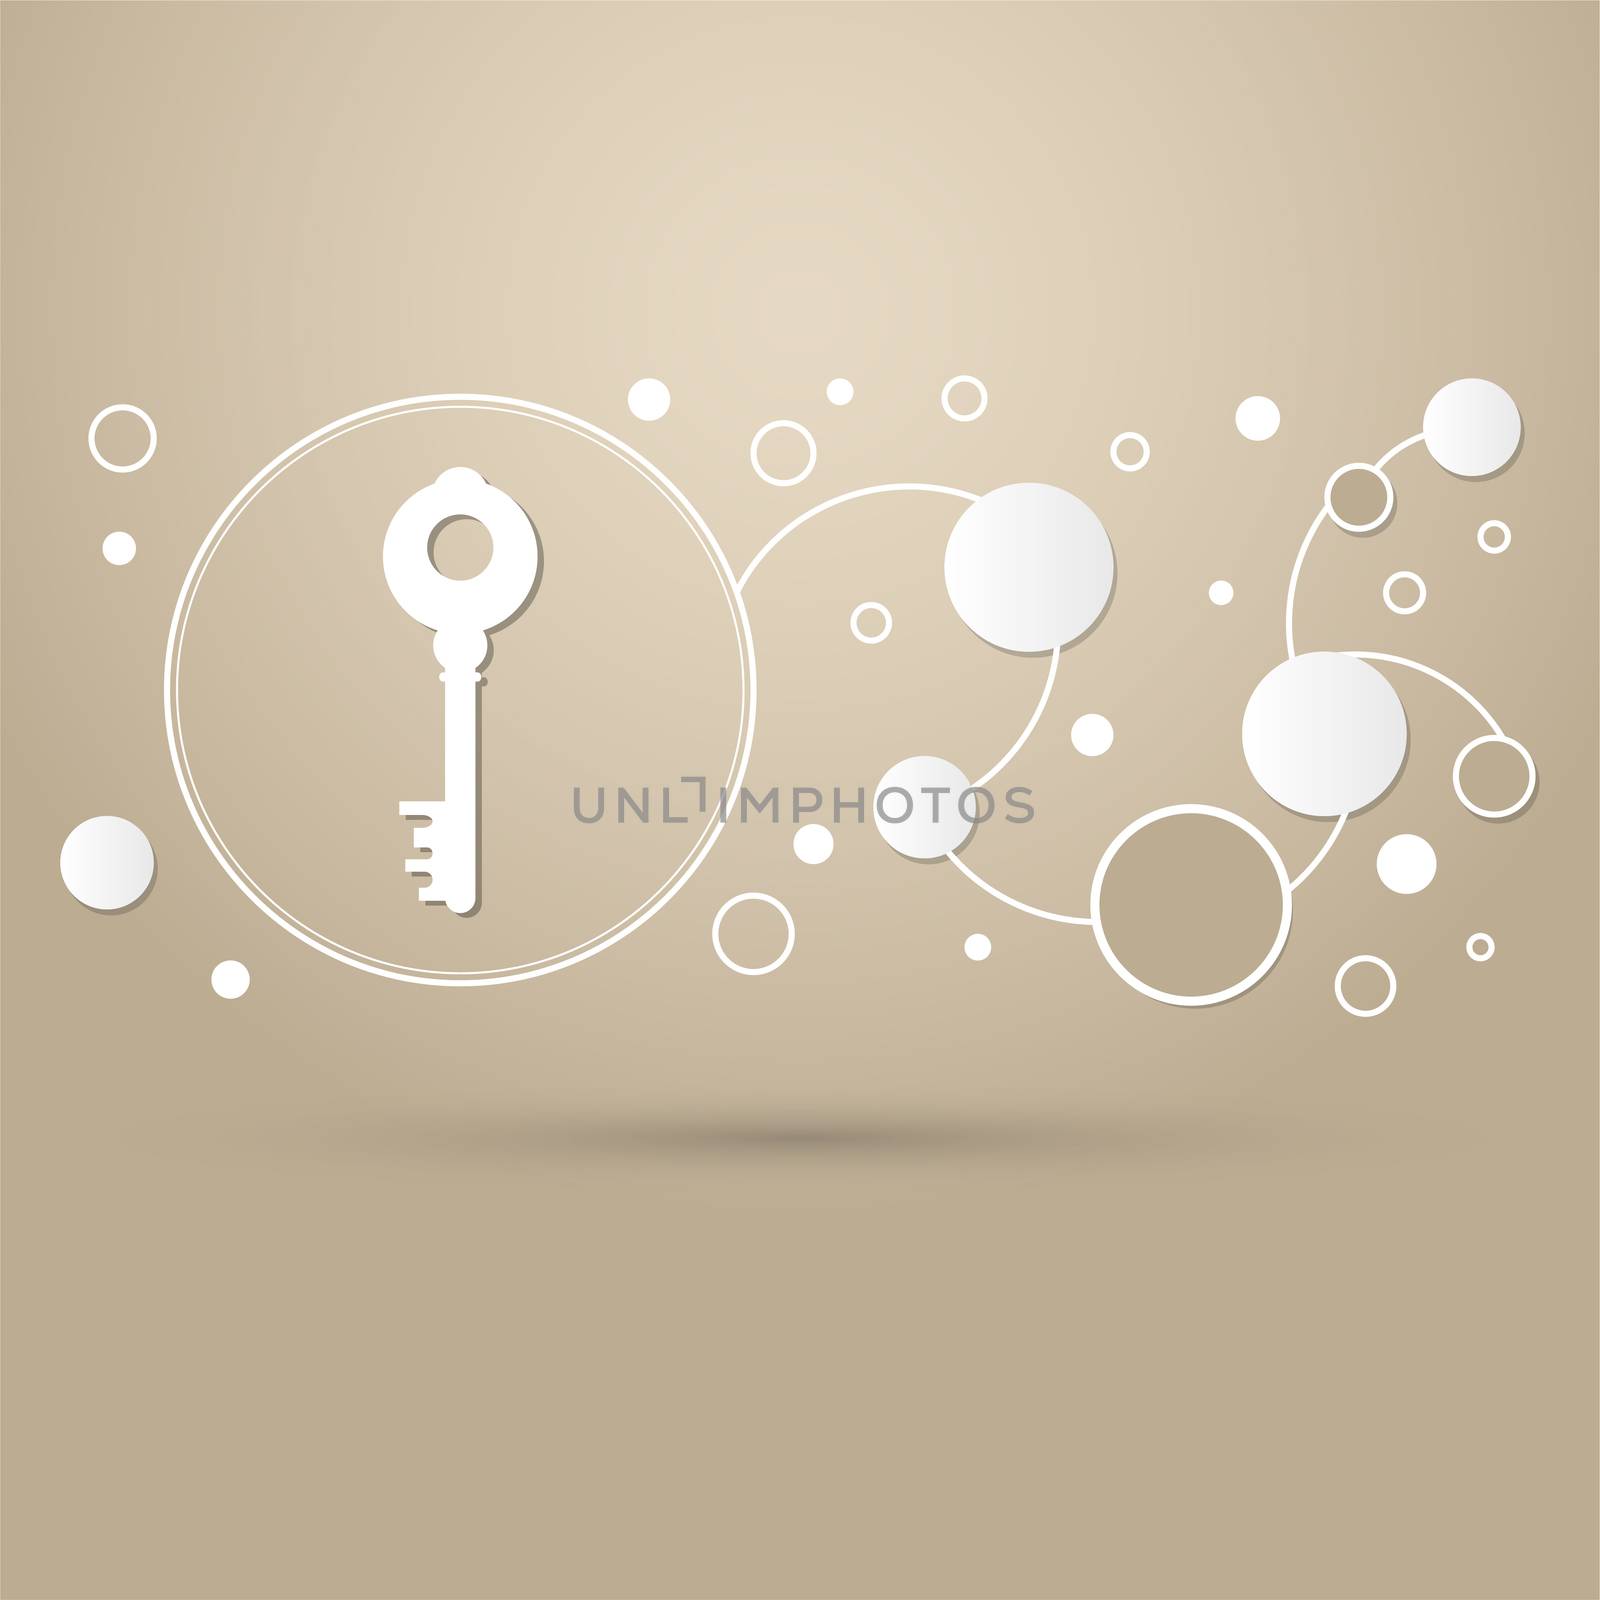 Key Icon on a brown background with elegant style and modern design infographic. illustration